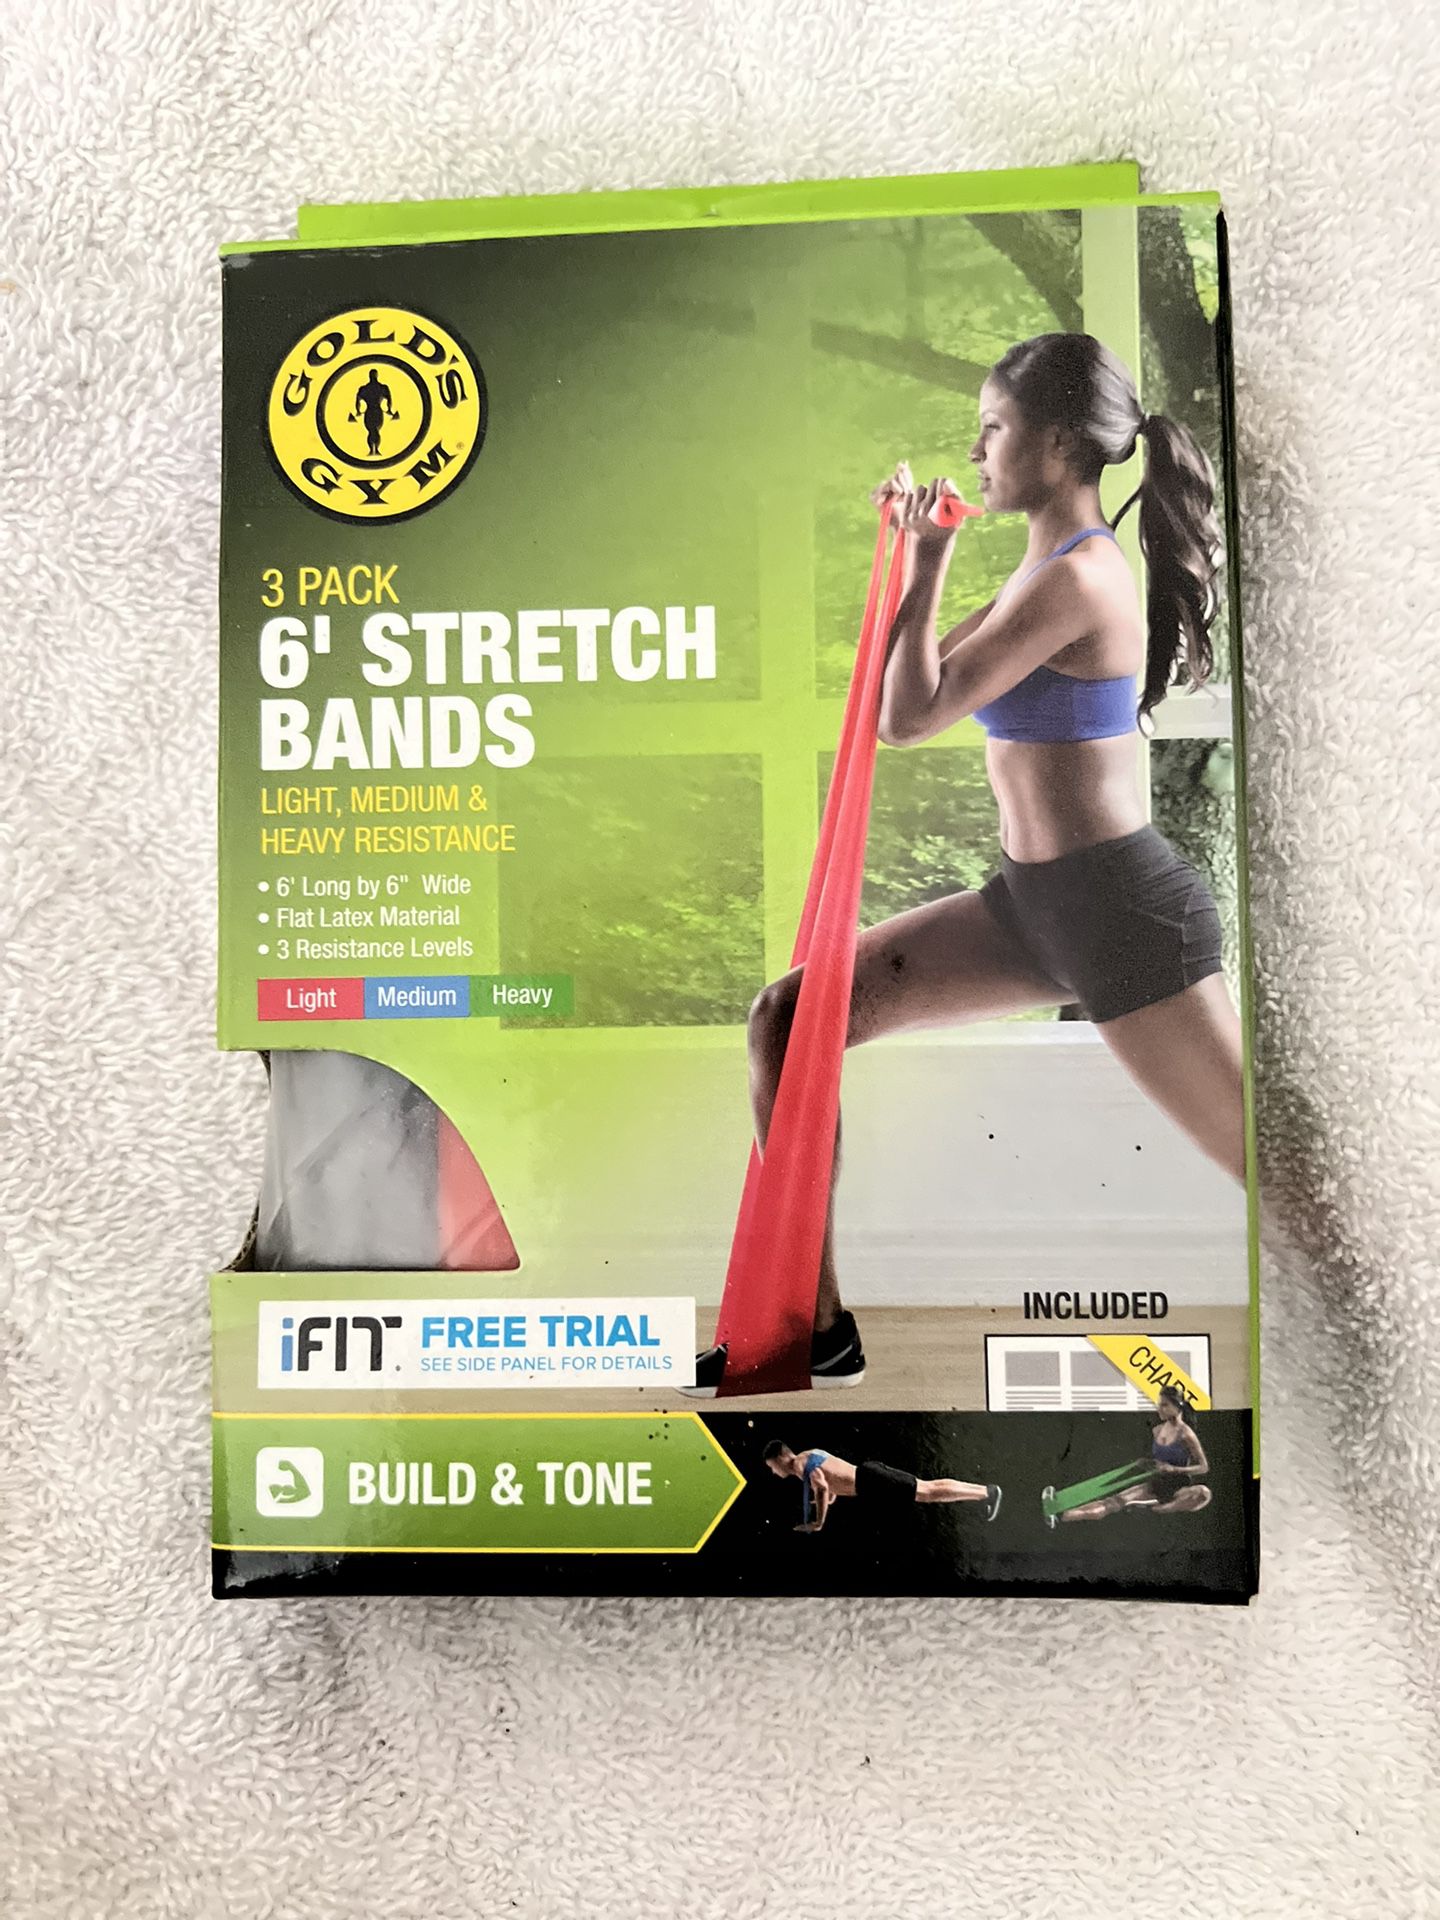 Stretch Bands 6’ 3 Pack Gold’s Gym Build And Tone New 